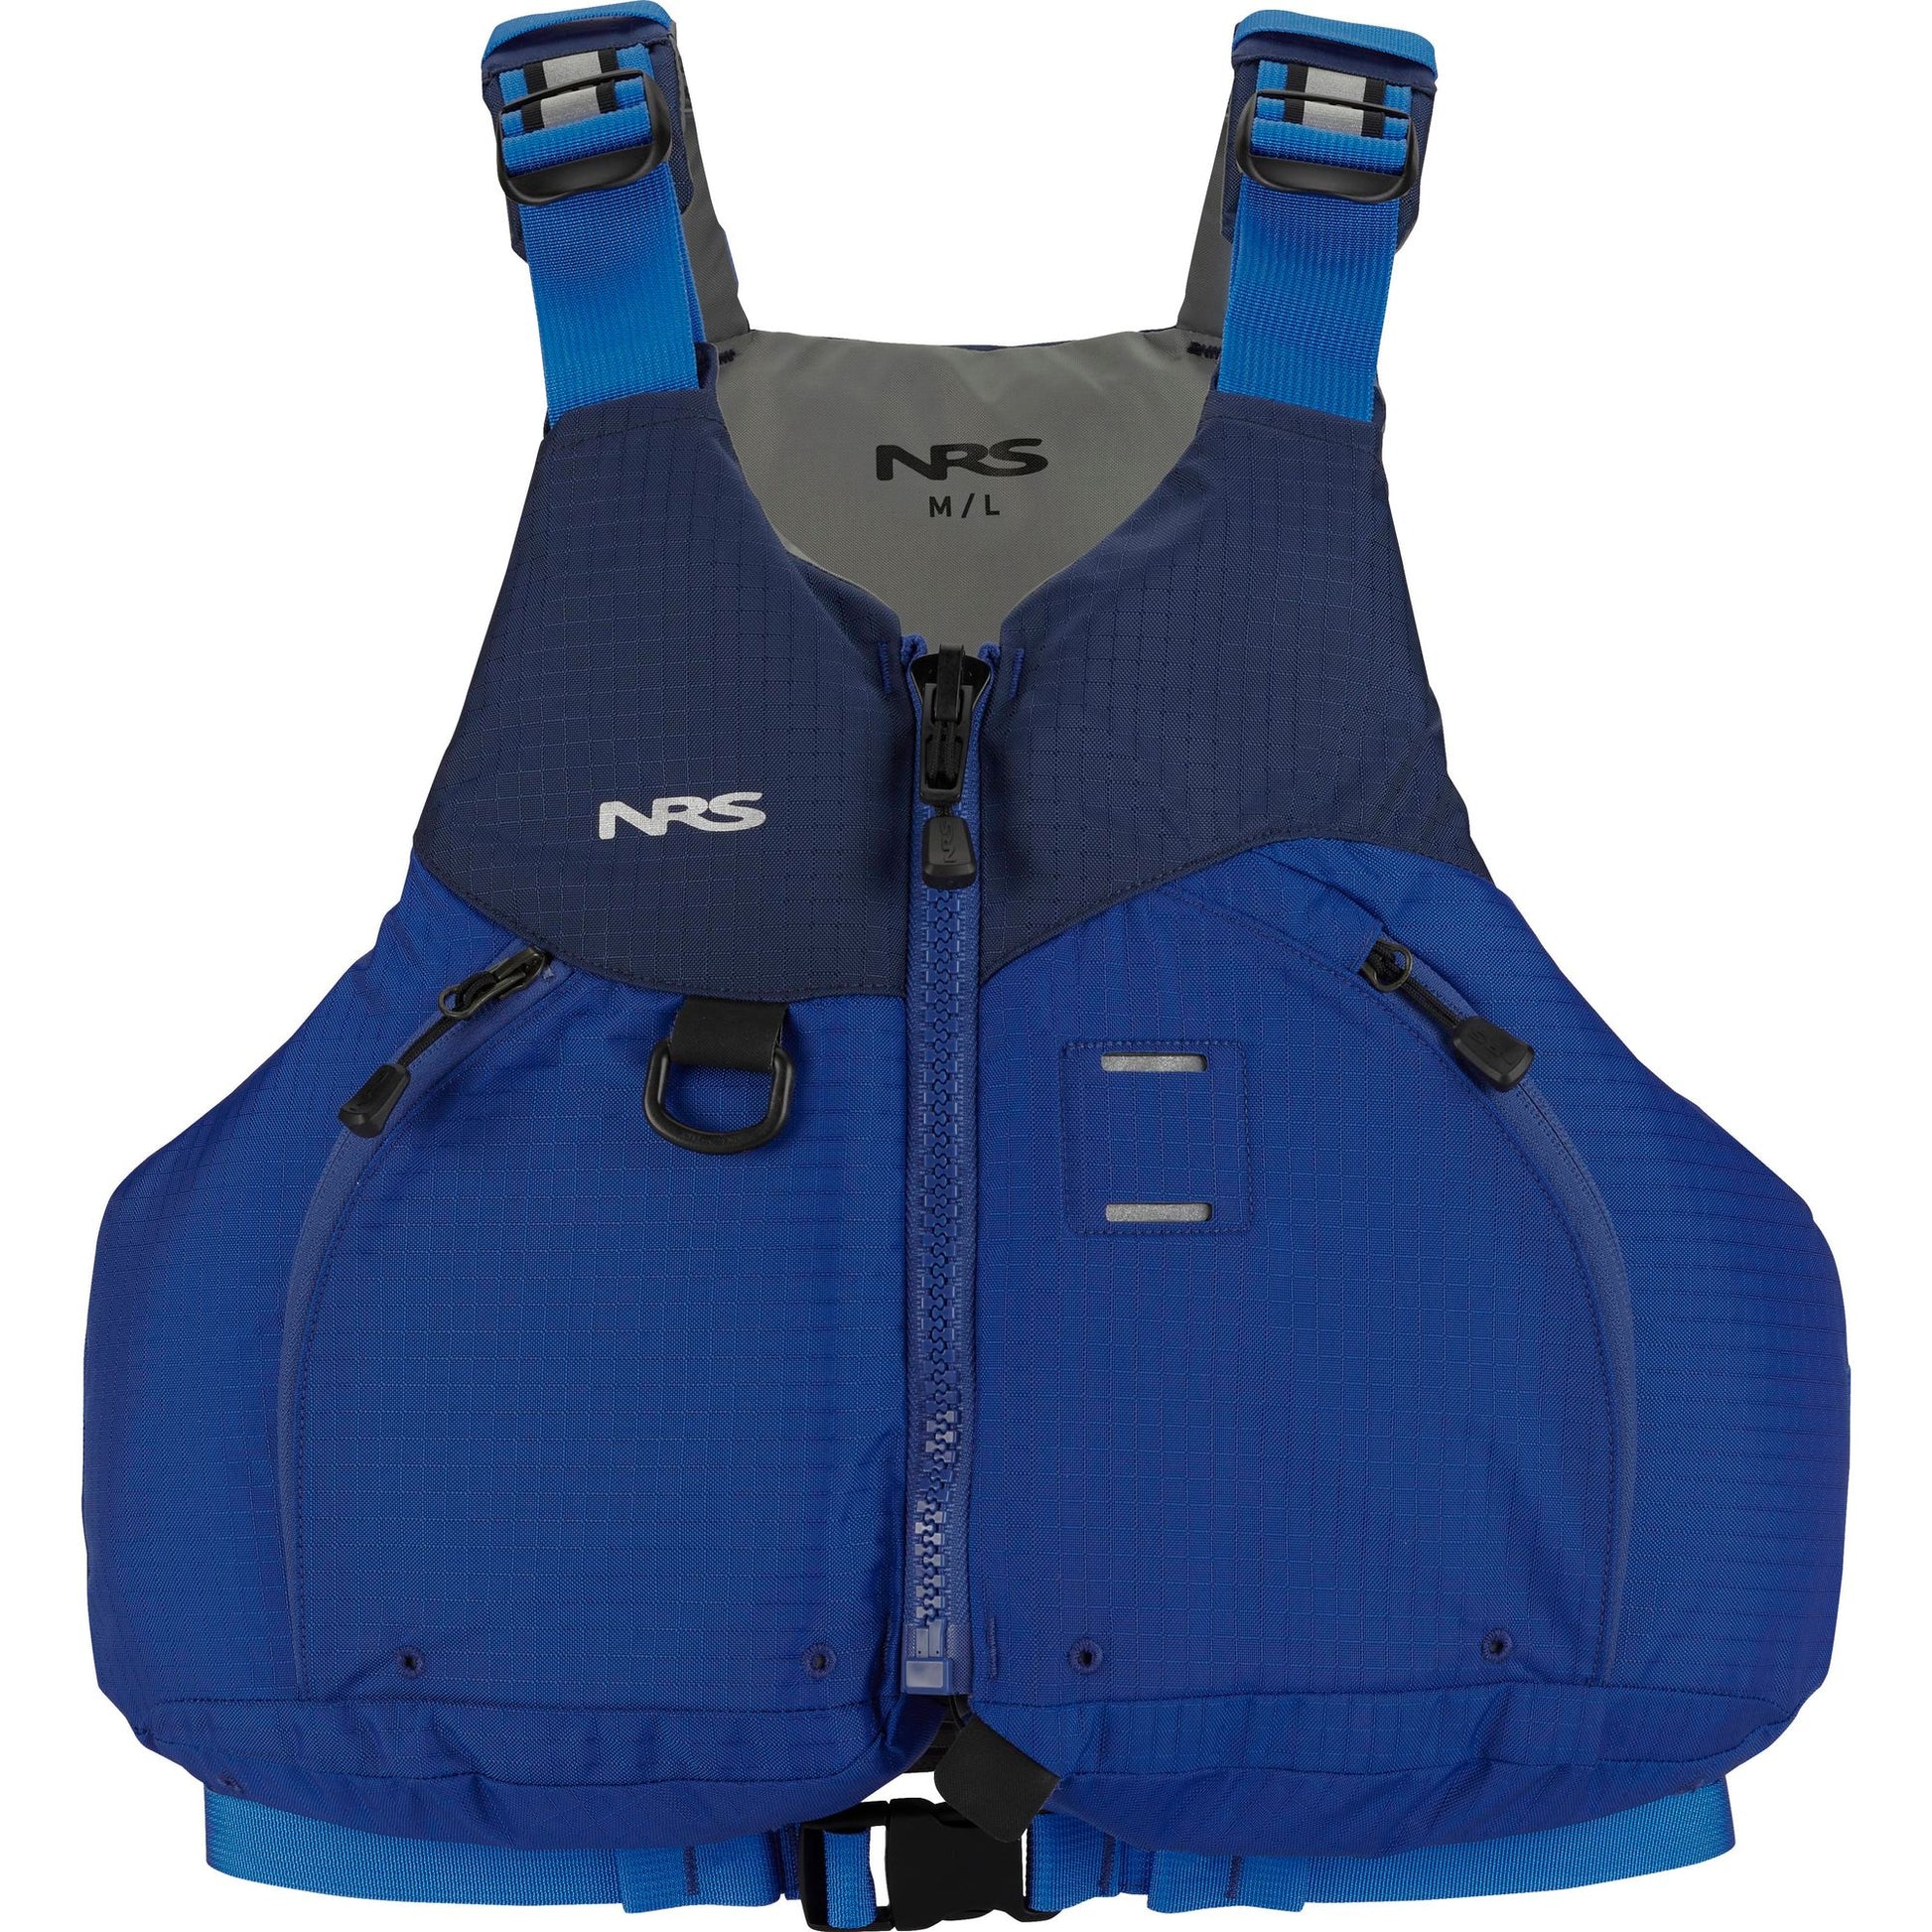 NRS Ambient PFD in blue color, ensuring safety on the water.